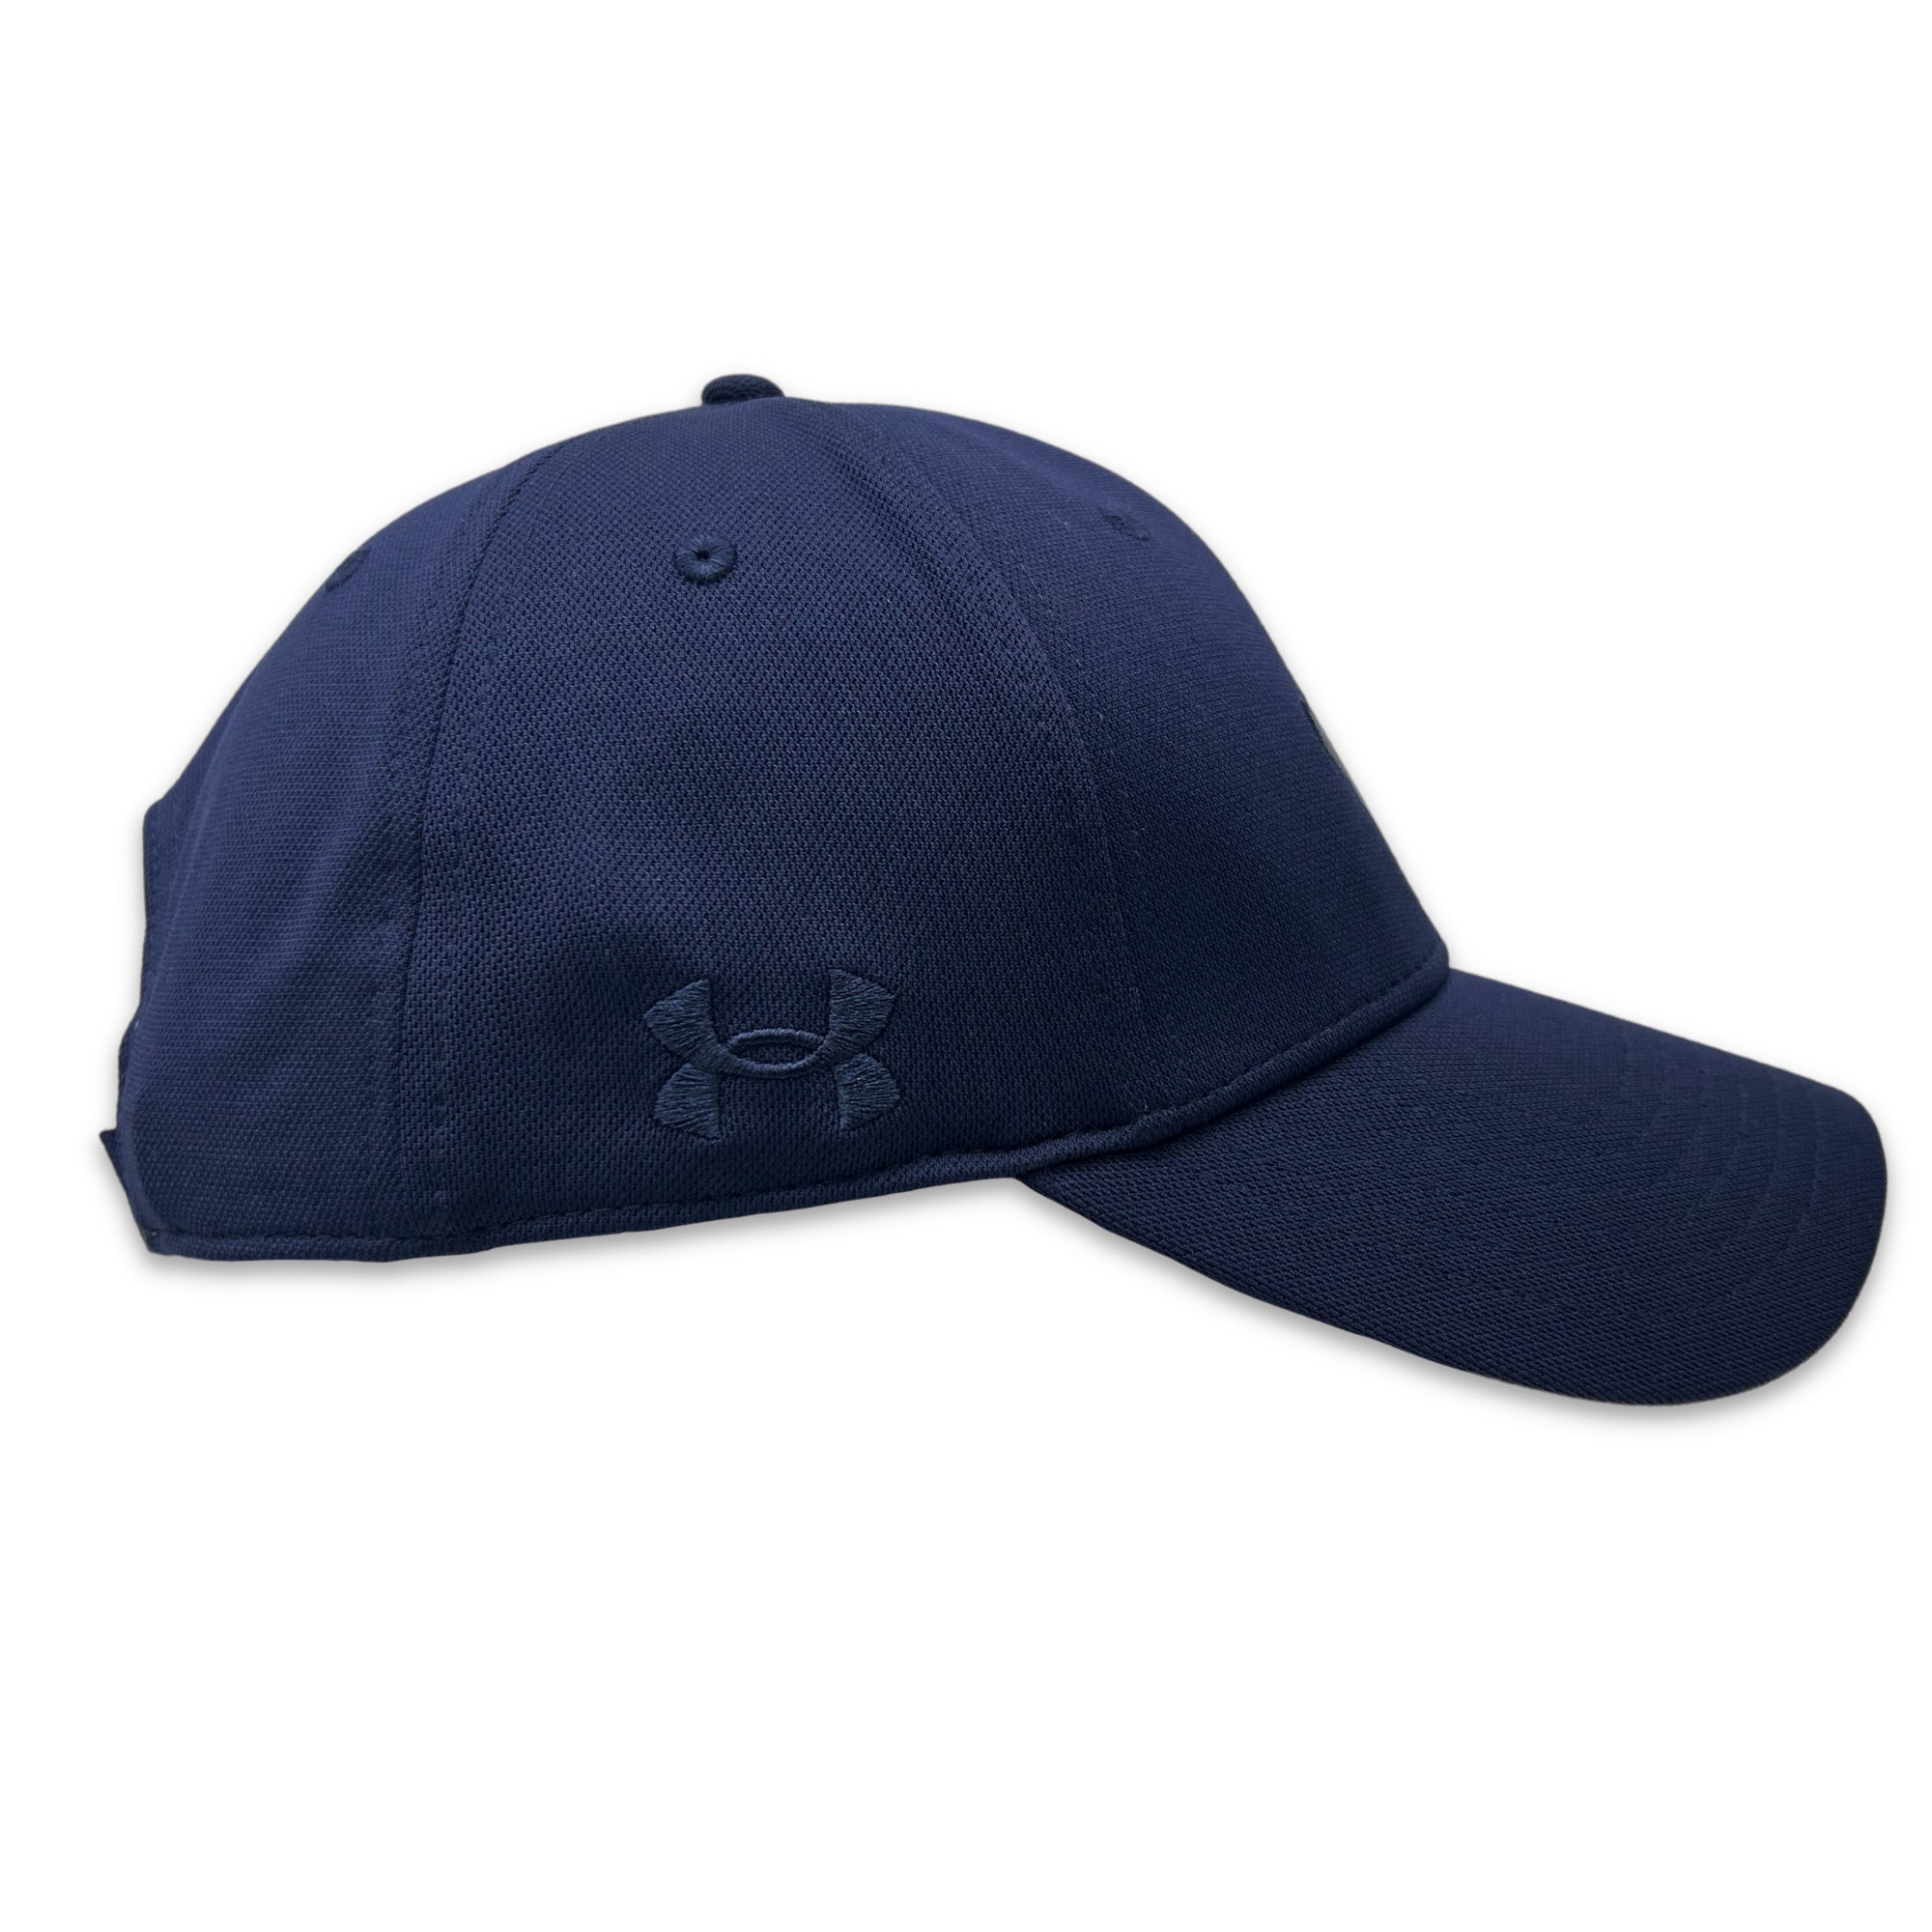 Armour (Navy) Hat 2023 Under Navy Adjustable Blitzing Rivalry